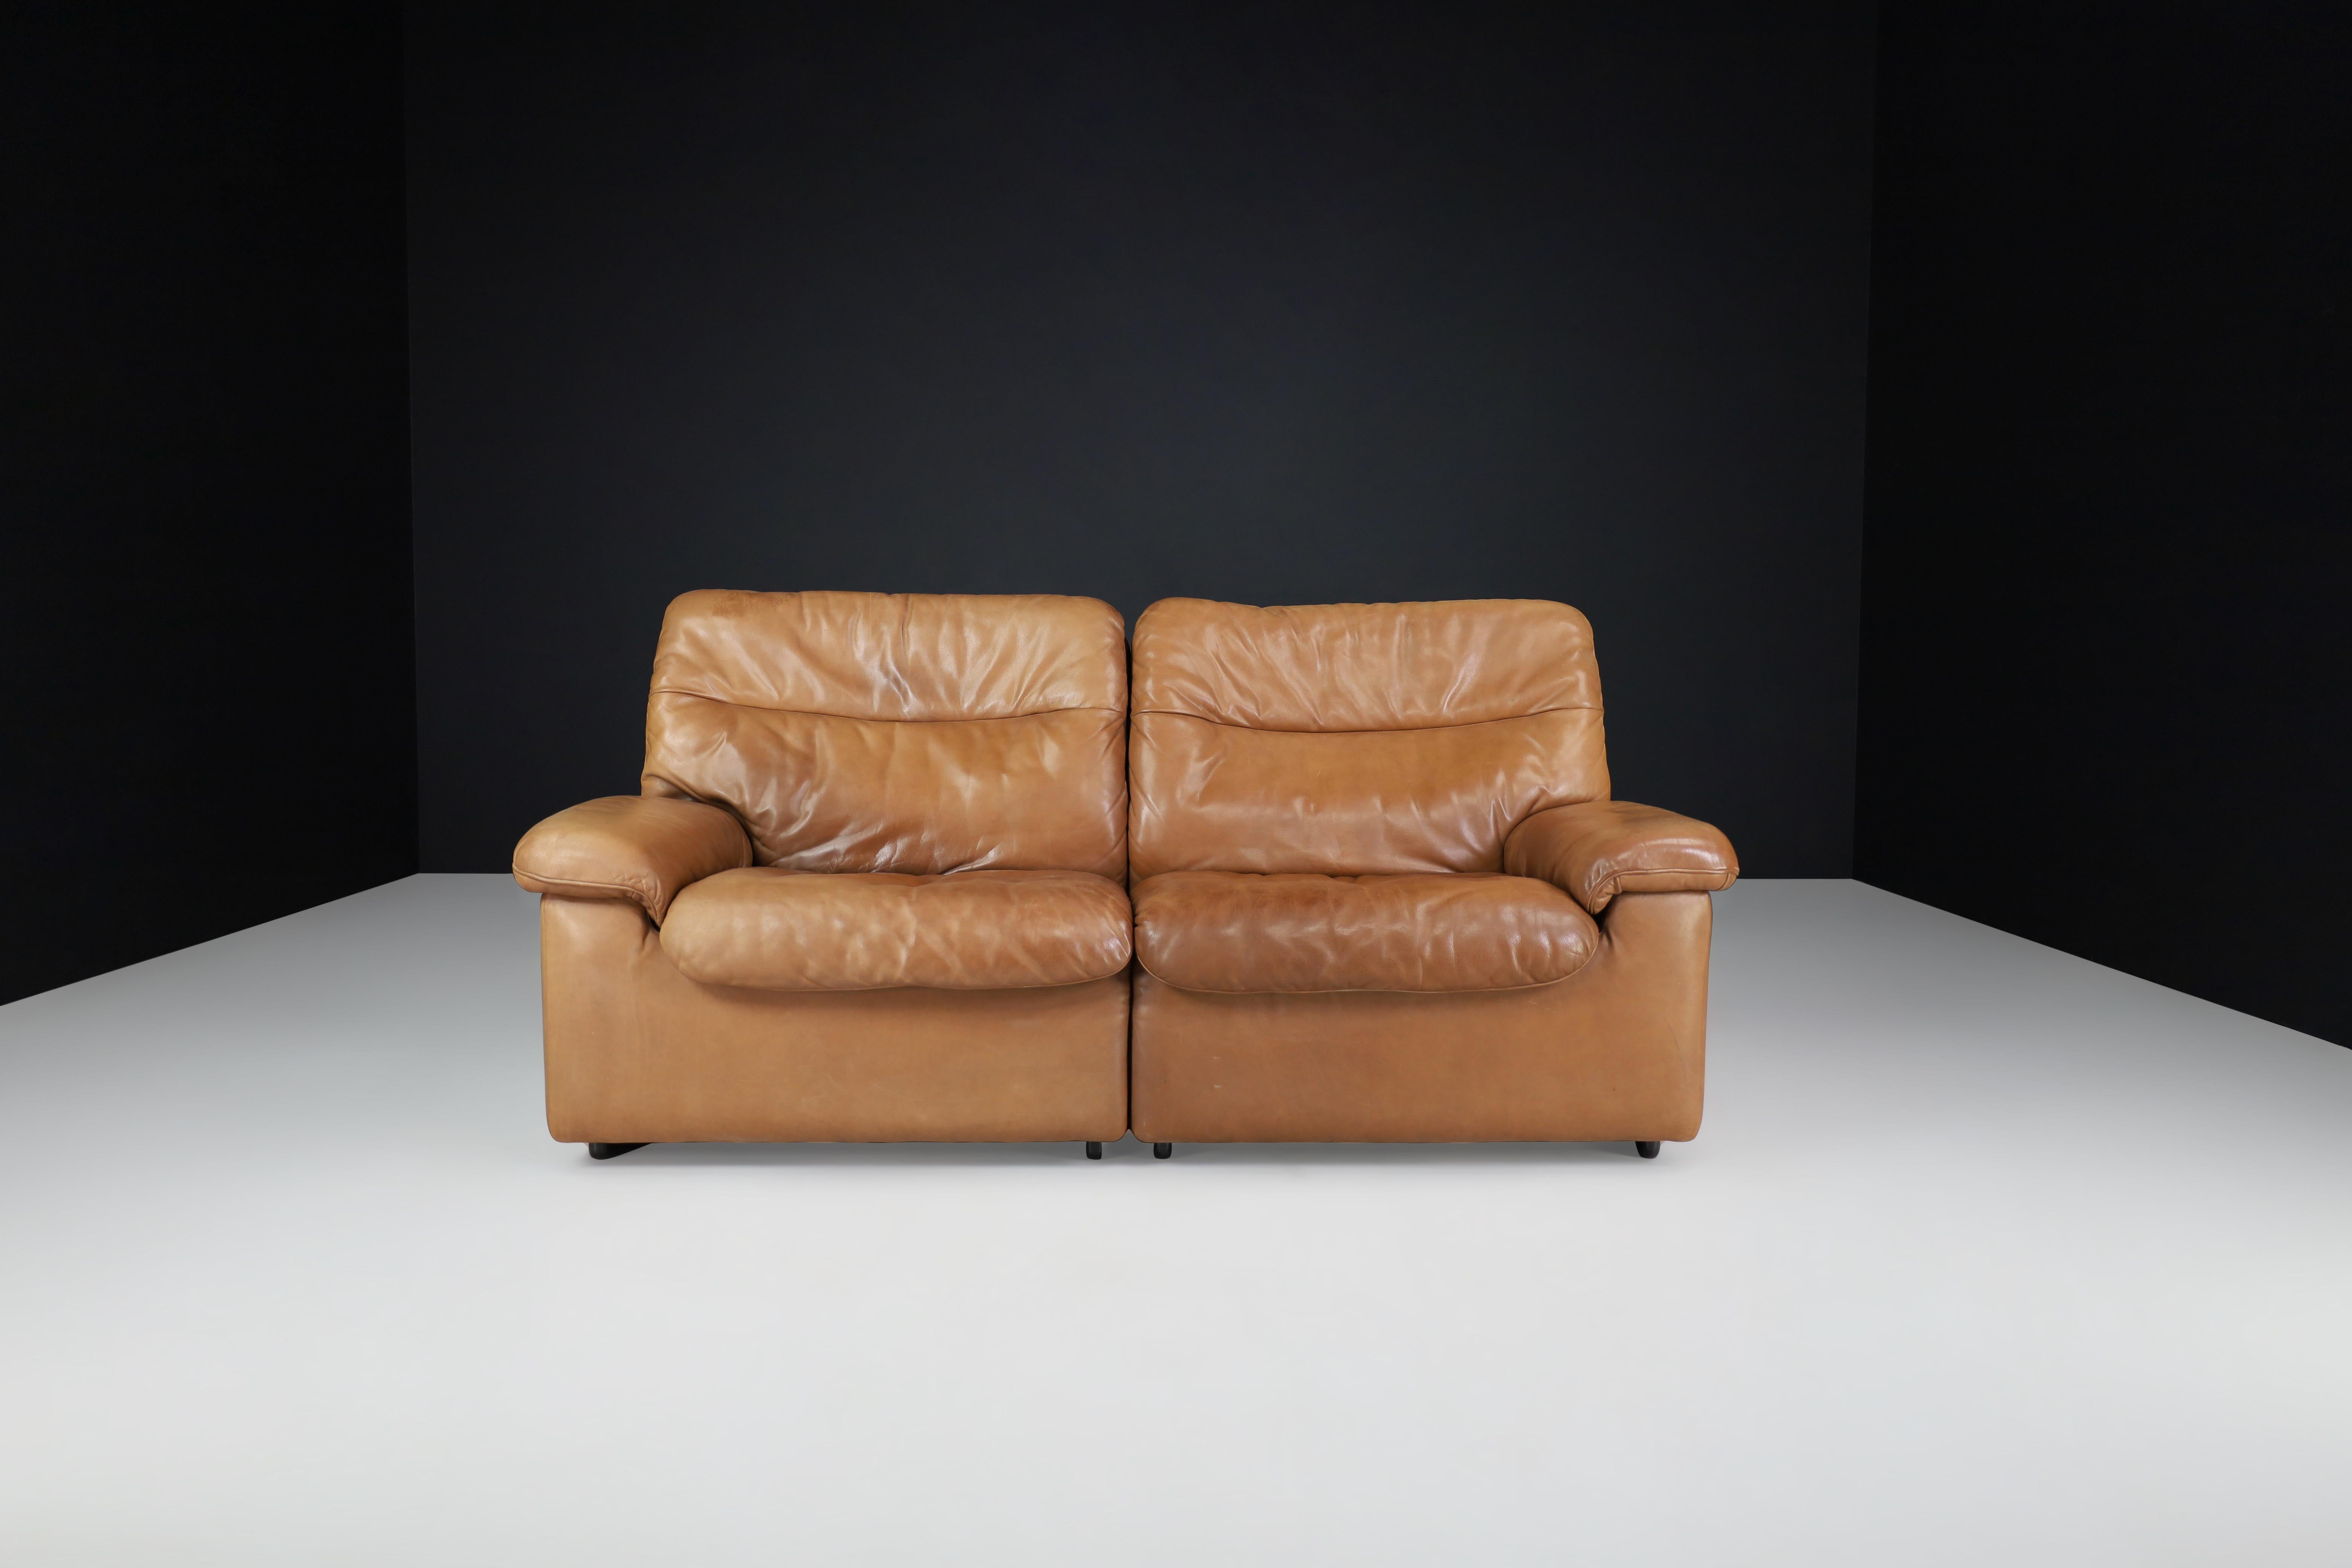 De Sede DS 63 Two-Seater Sofa in Patinated Leather, Switzerland, 1970s For Sale 2